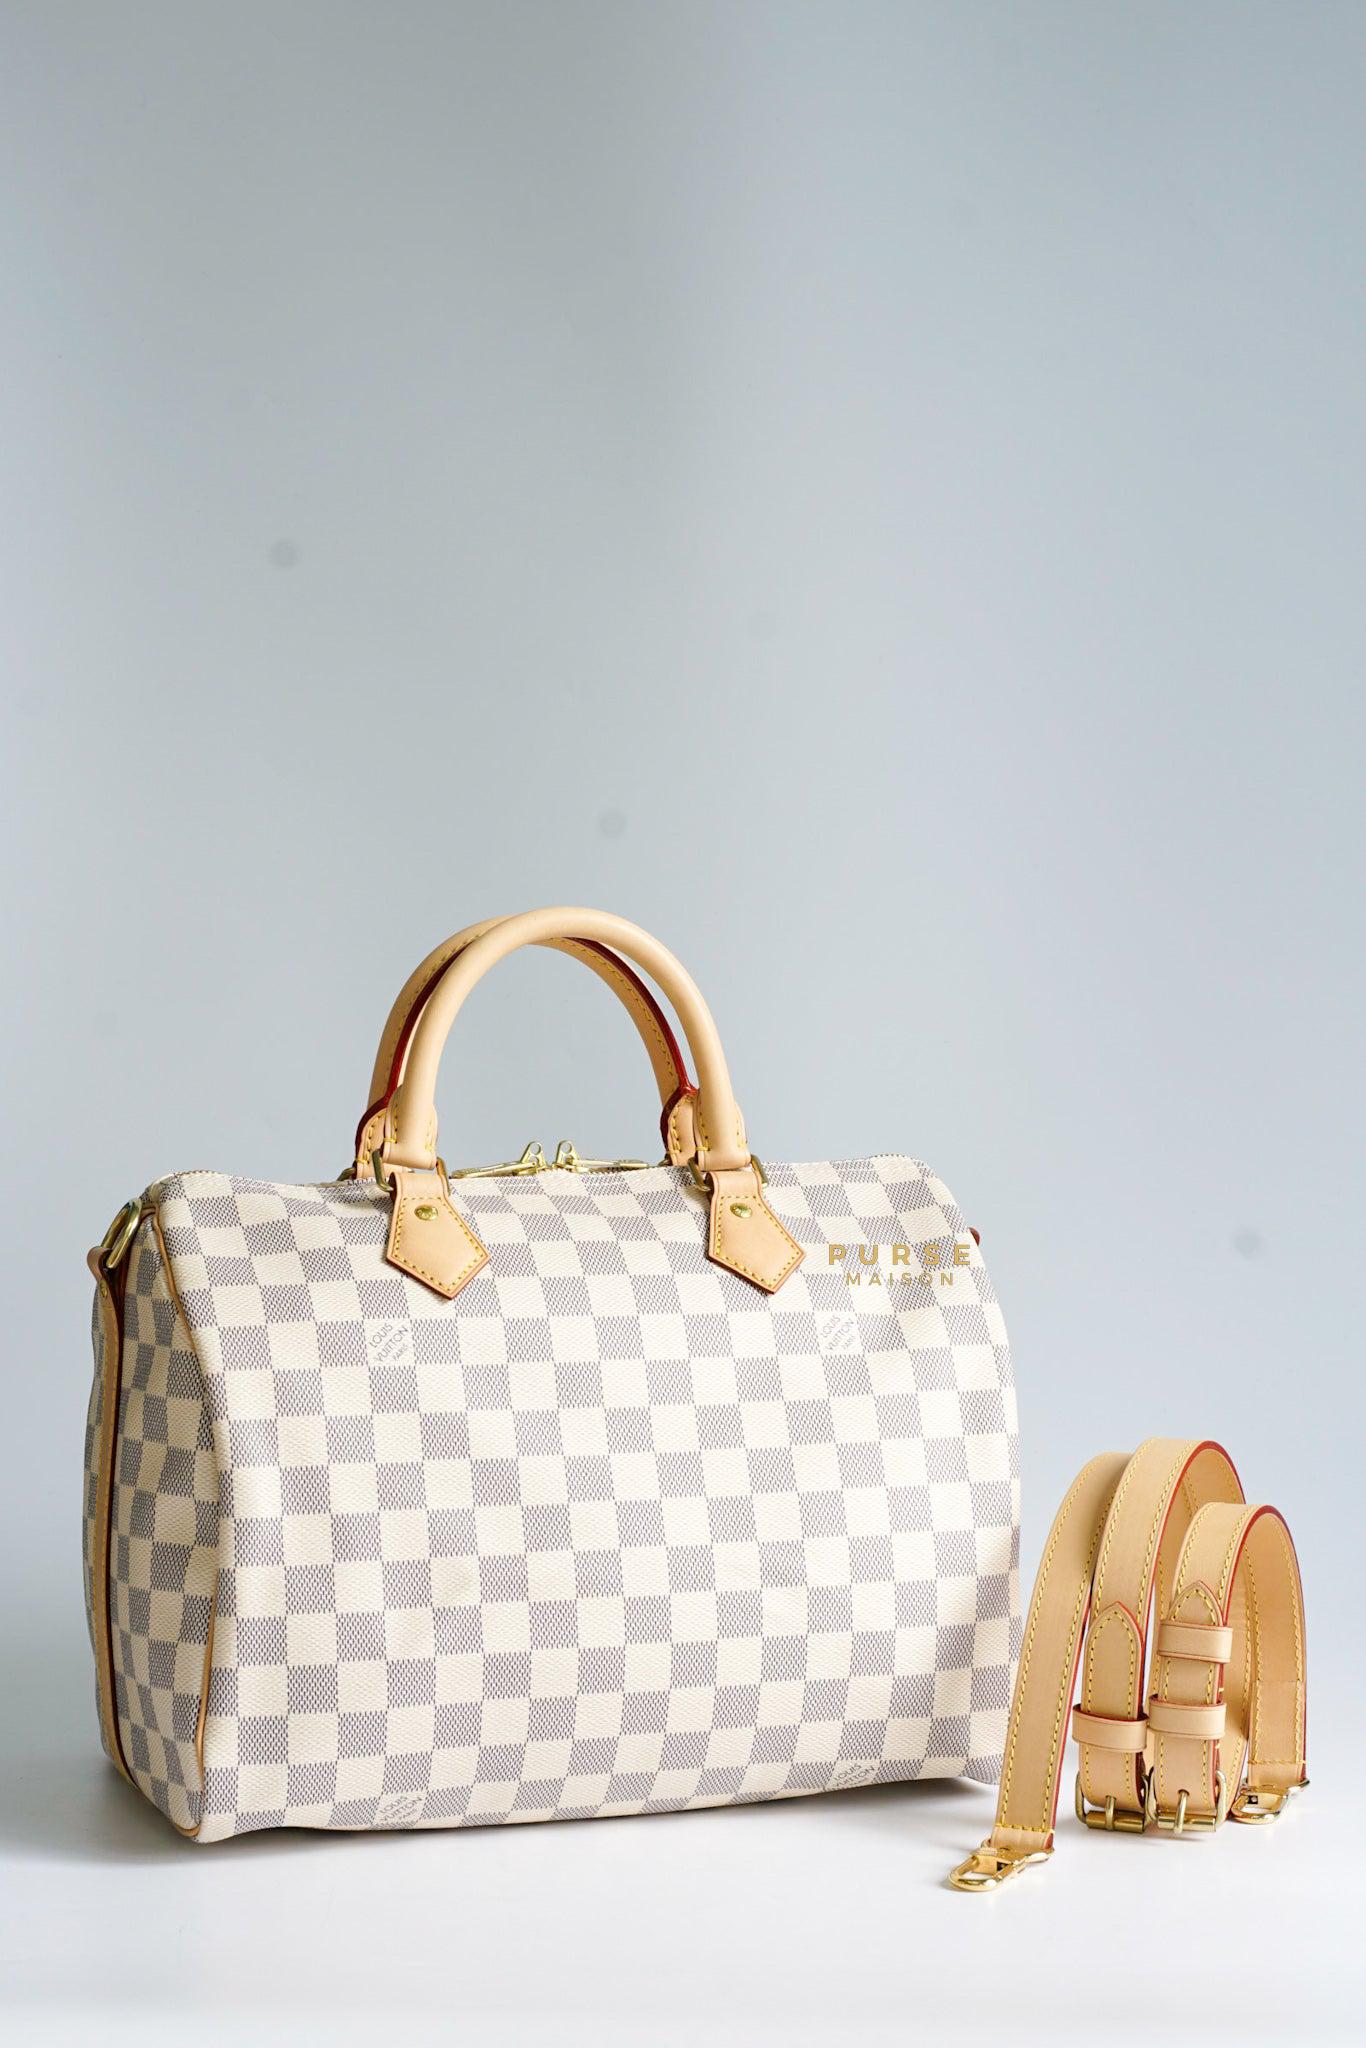 To speed up the process of Louis Vuitton microchipped bag